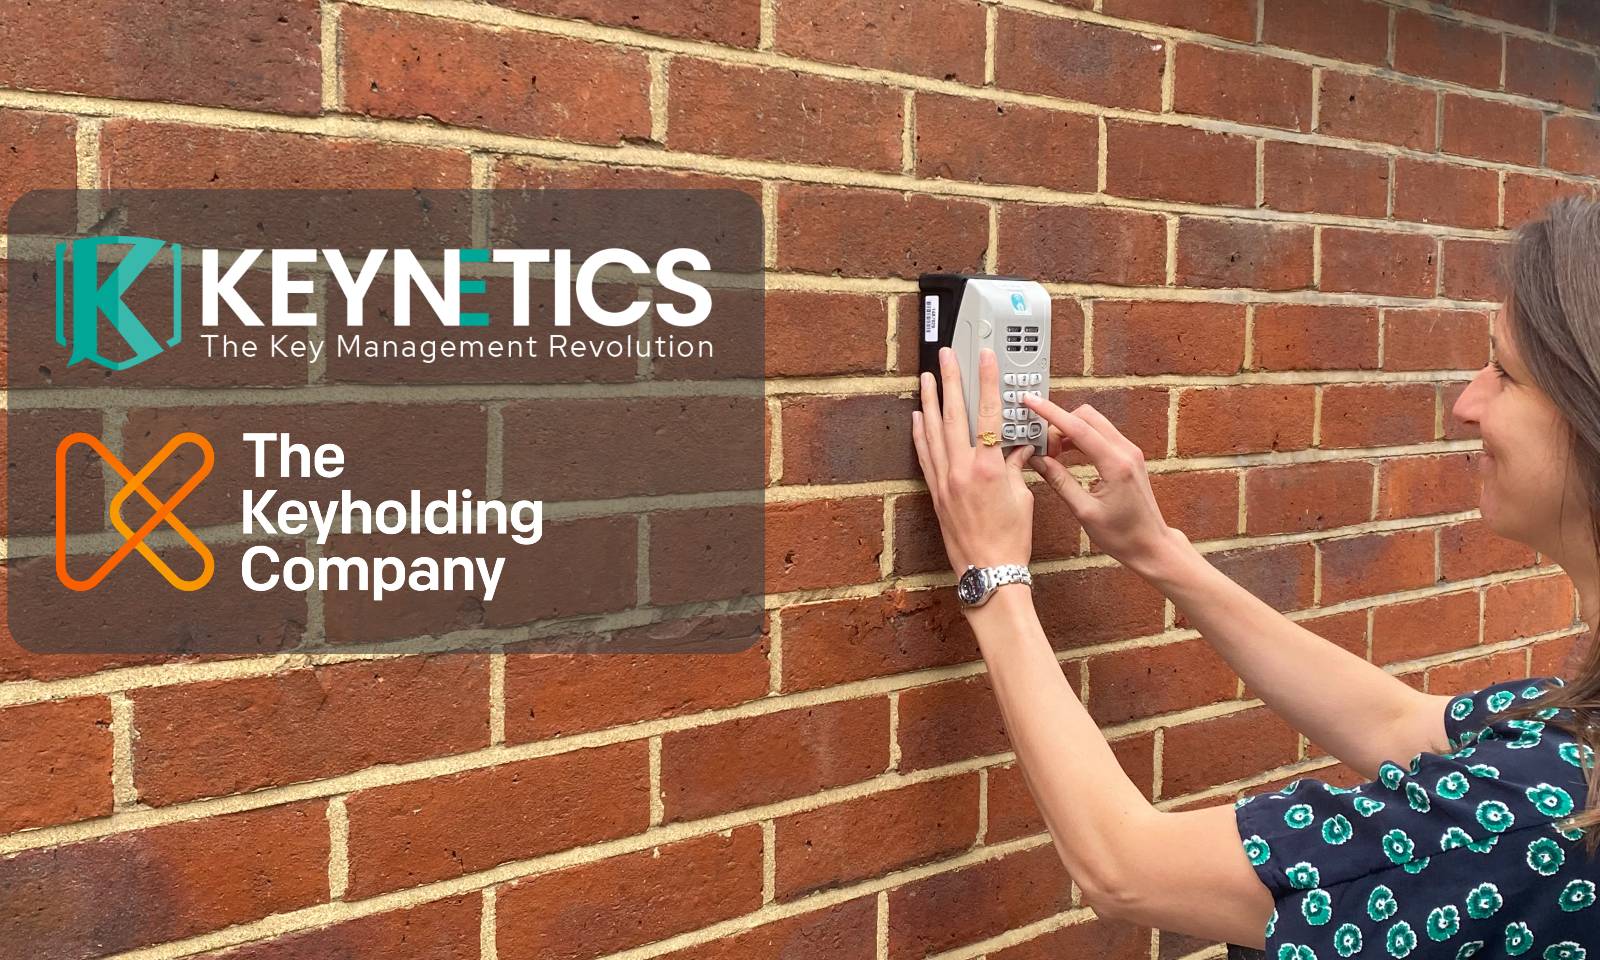 The Keyholding Company and Keynetics partner to launch keybox-enabled alarm response service